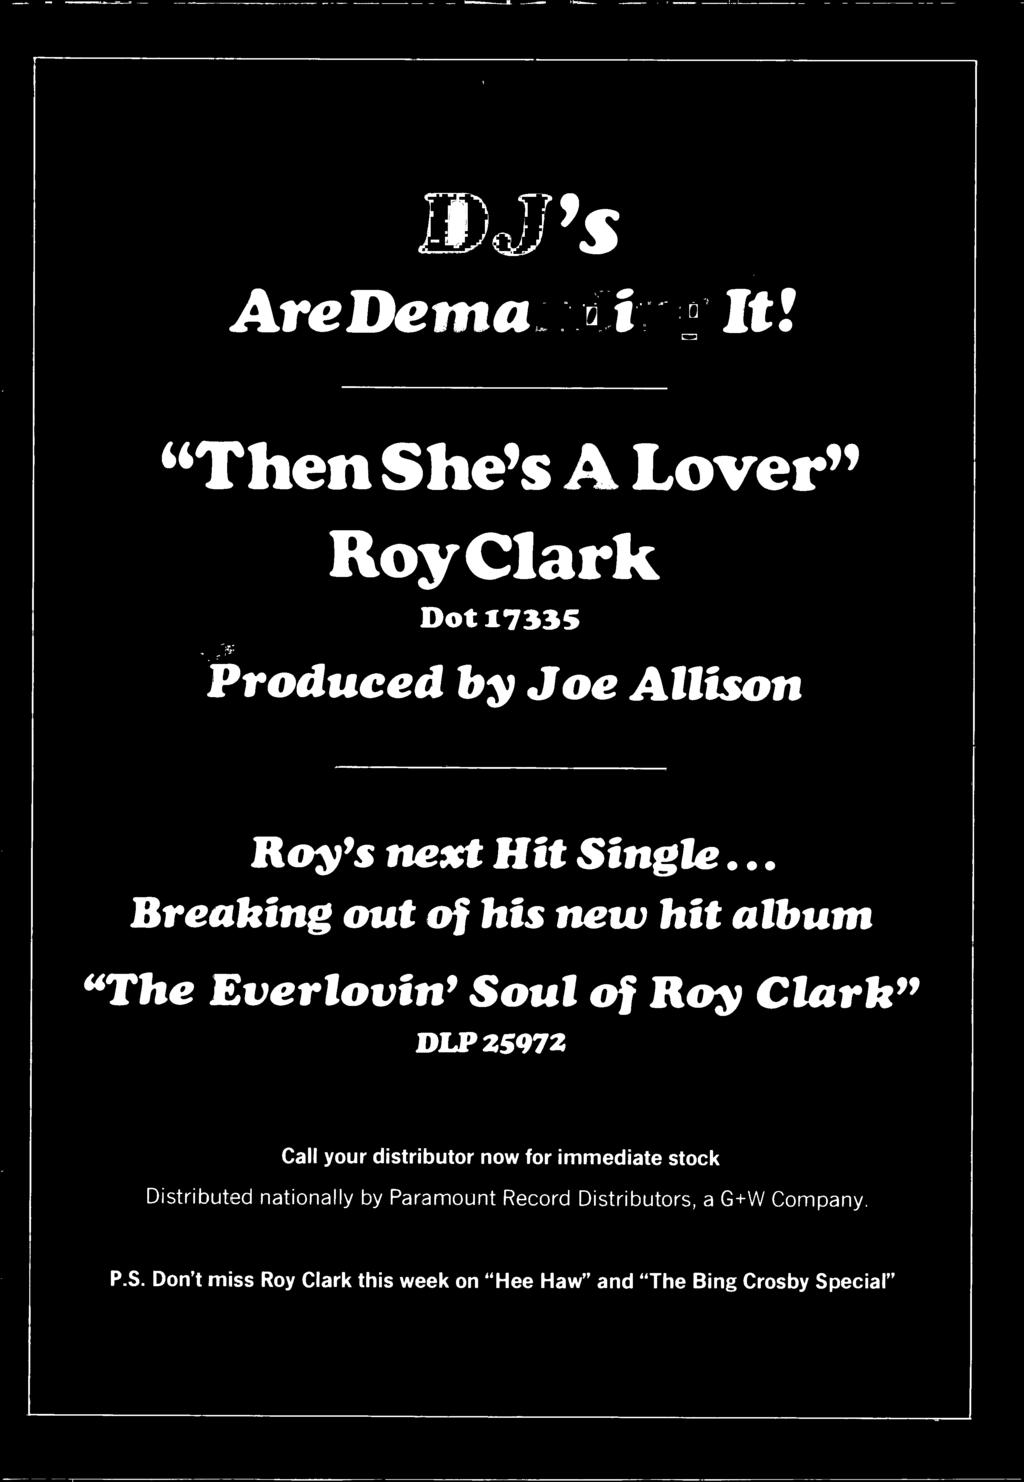 .. Breaking out of his new hit album "The Everlovin' Soul of Roy Clark" DLP 25972 Call your distributor